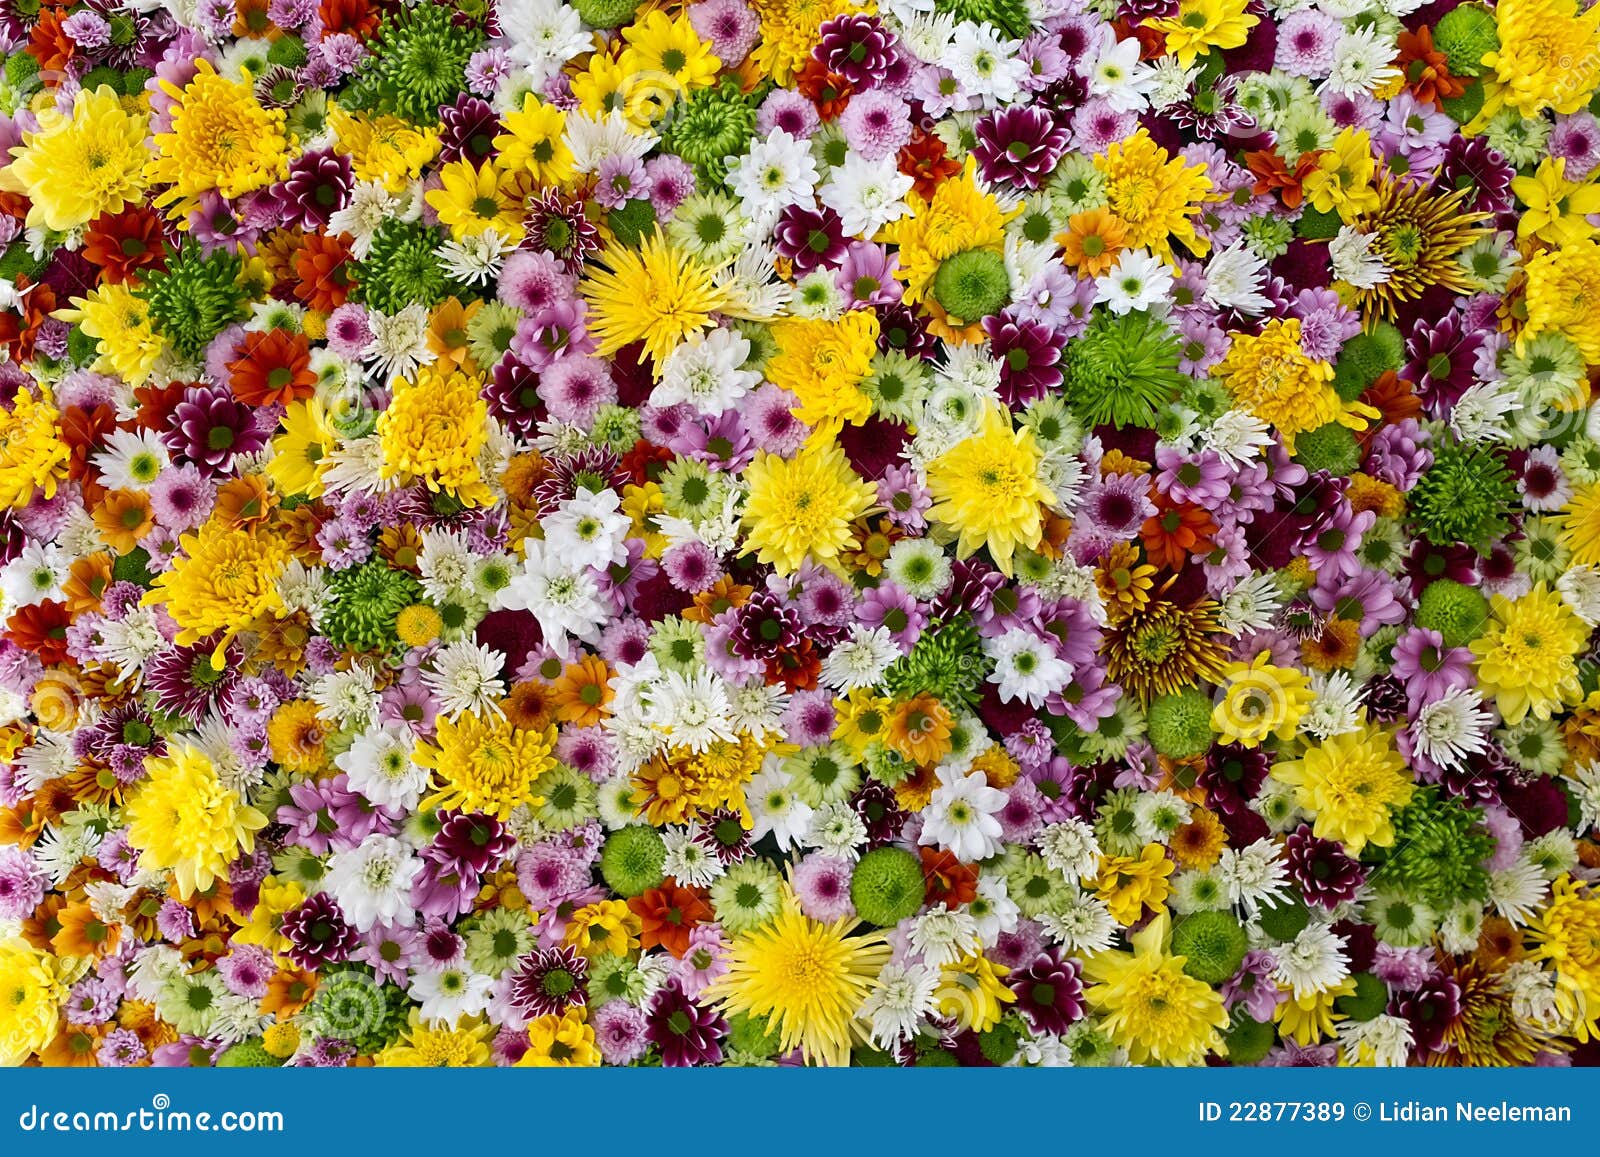 Colourful Flowers Background Stock Image - Image of natural, colourful:  22877389